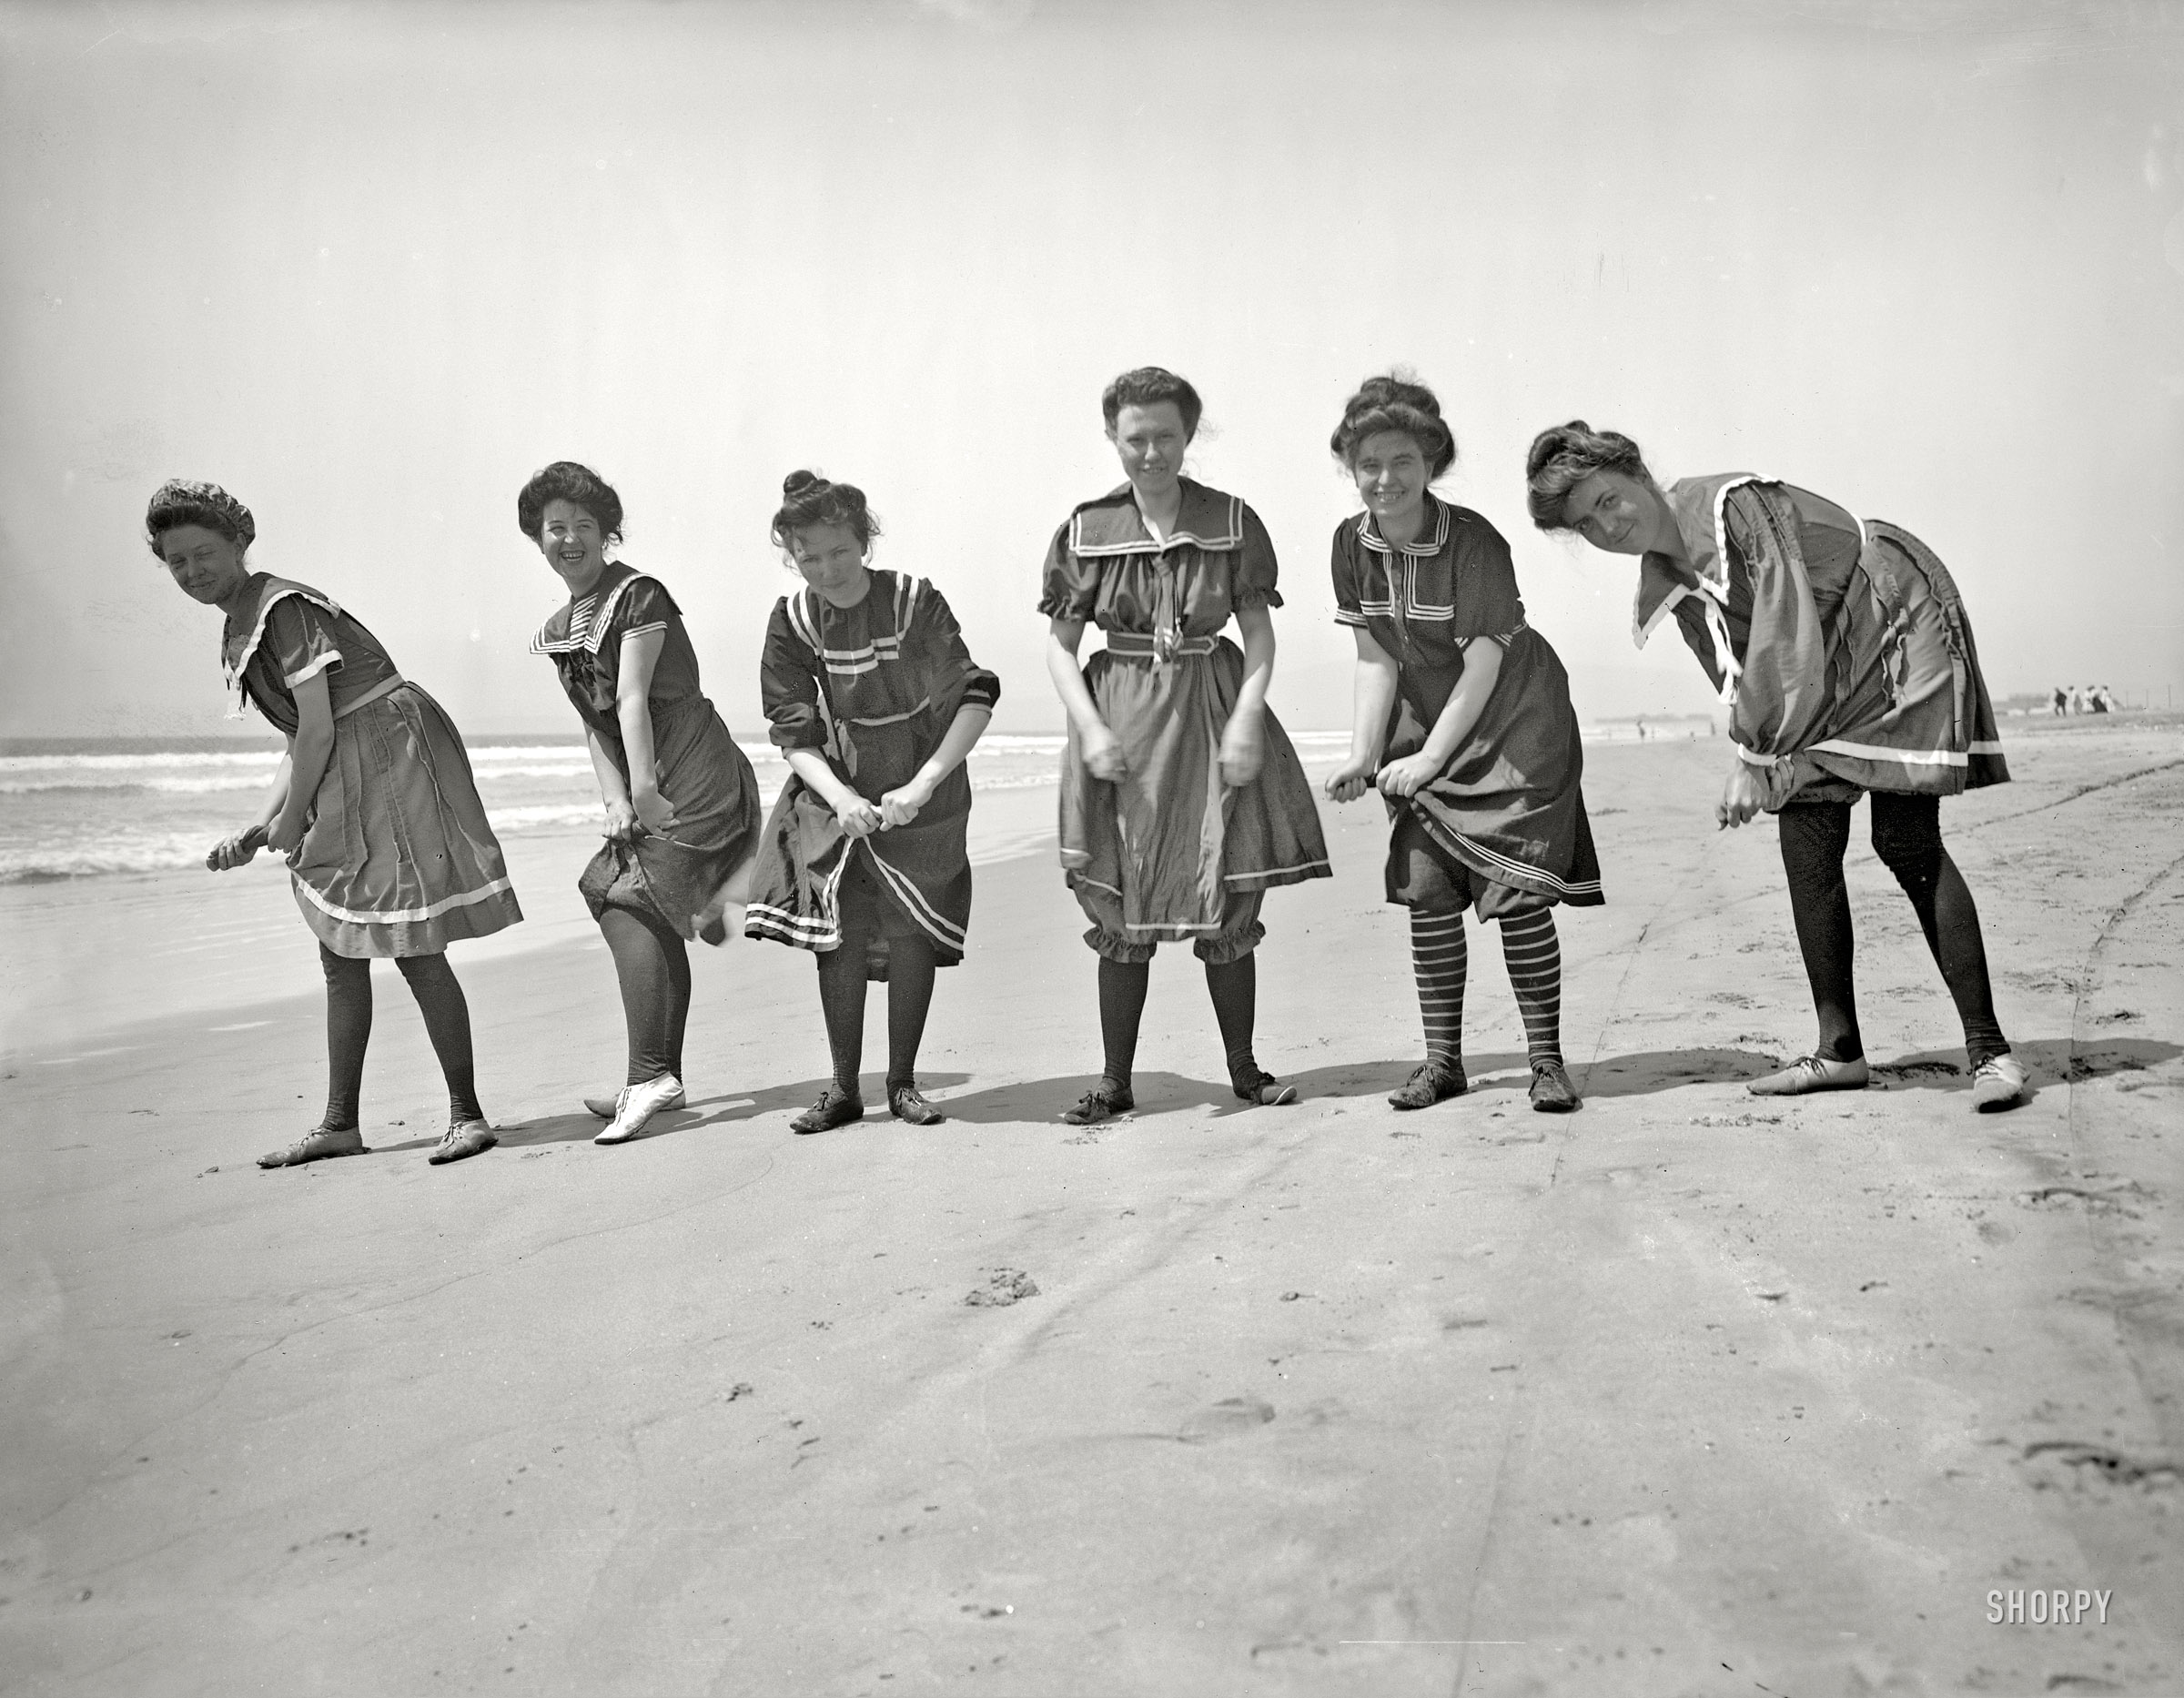 The Jersey Shore circa 1905. "A wringing match." Show us your knees! 8x10 inch dry plate glass negative, Detroit Publishing Company. View full size.